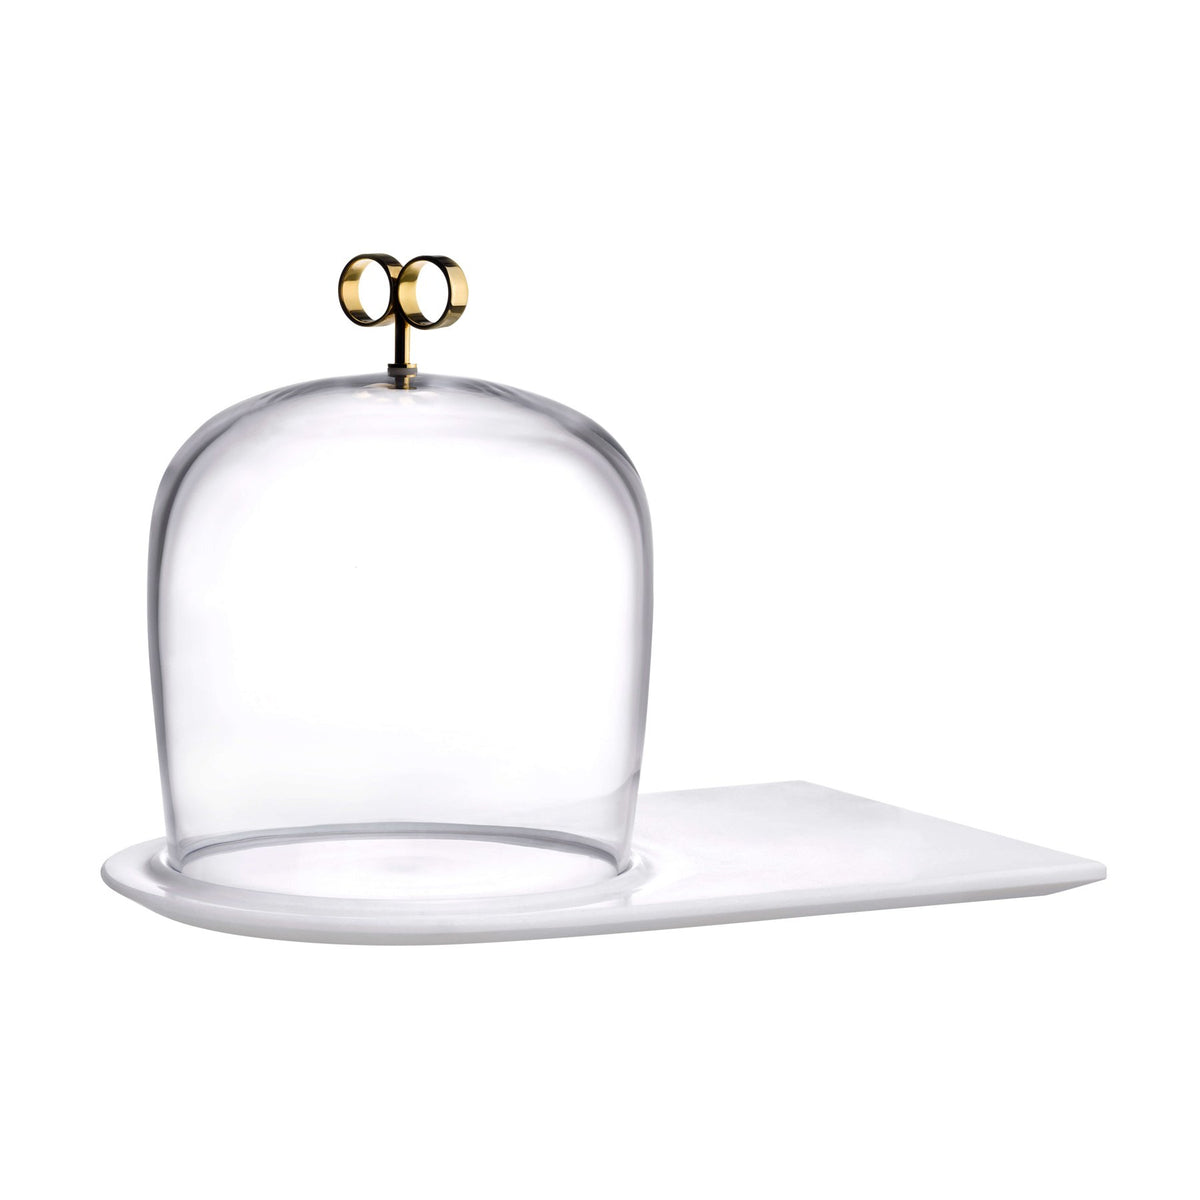 Nude Cupola Cake Dome with Brass Handle and Marble Base